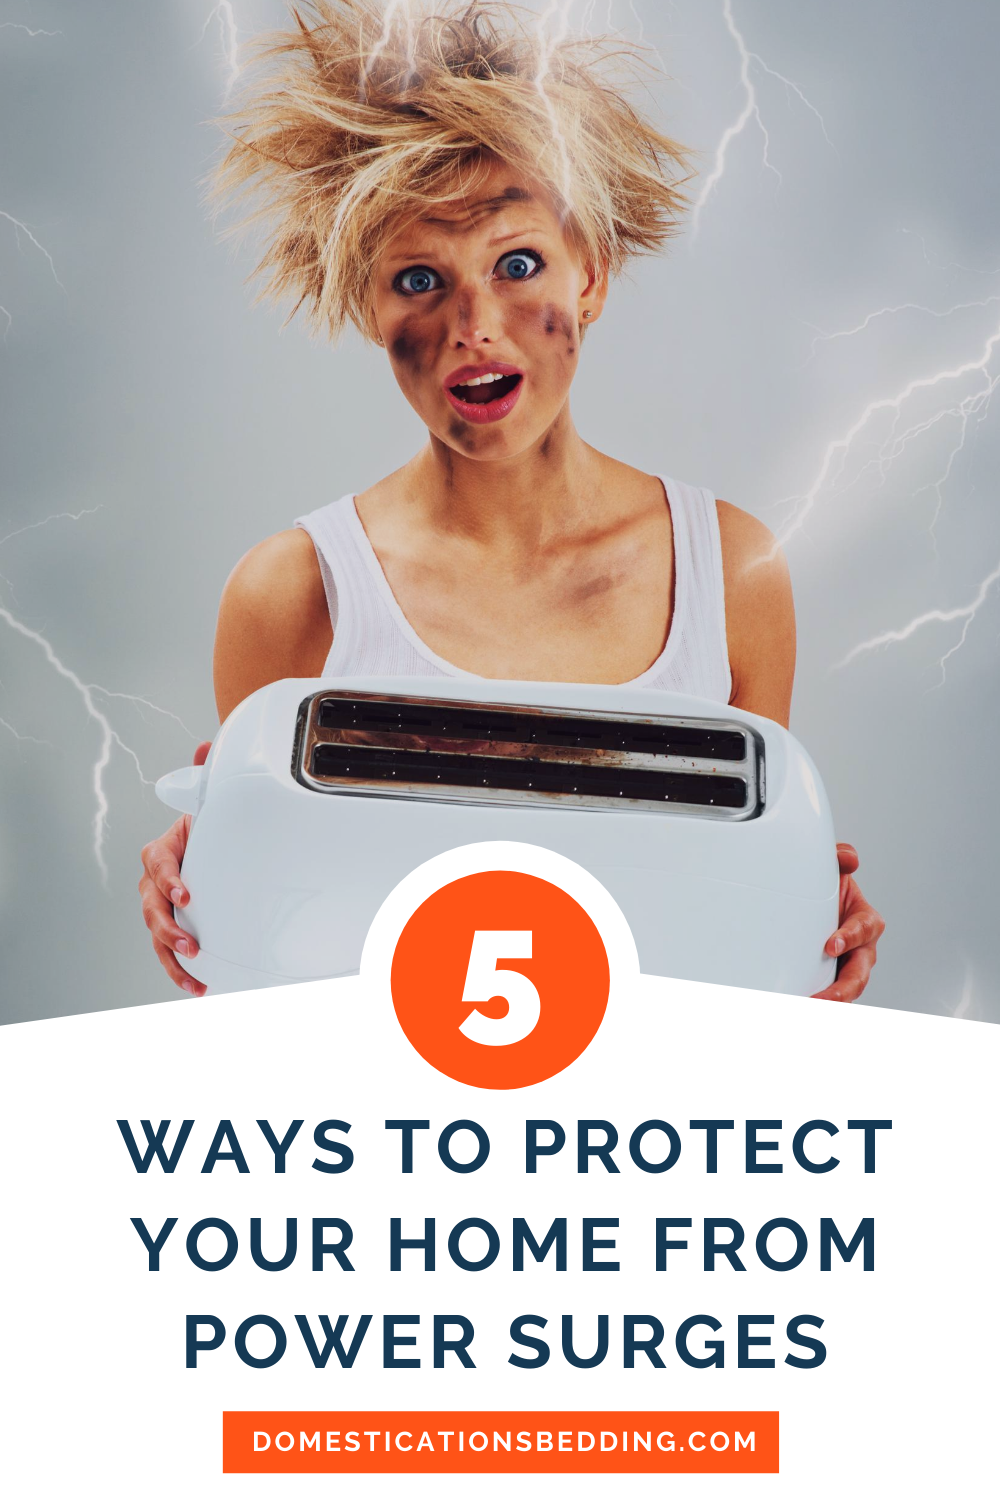 5 Ways to Protect Your Home From Power Surges